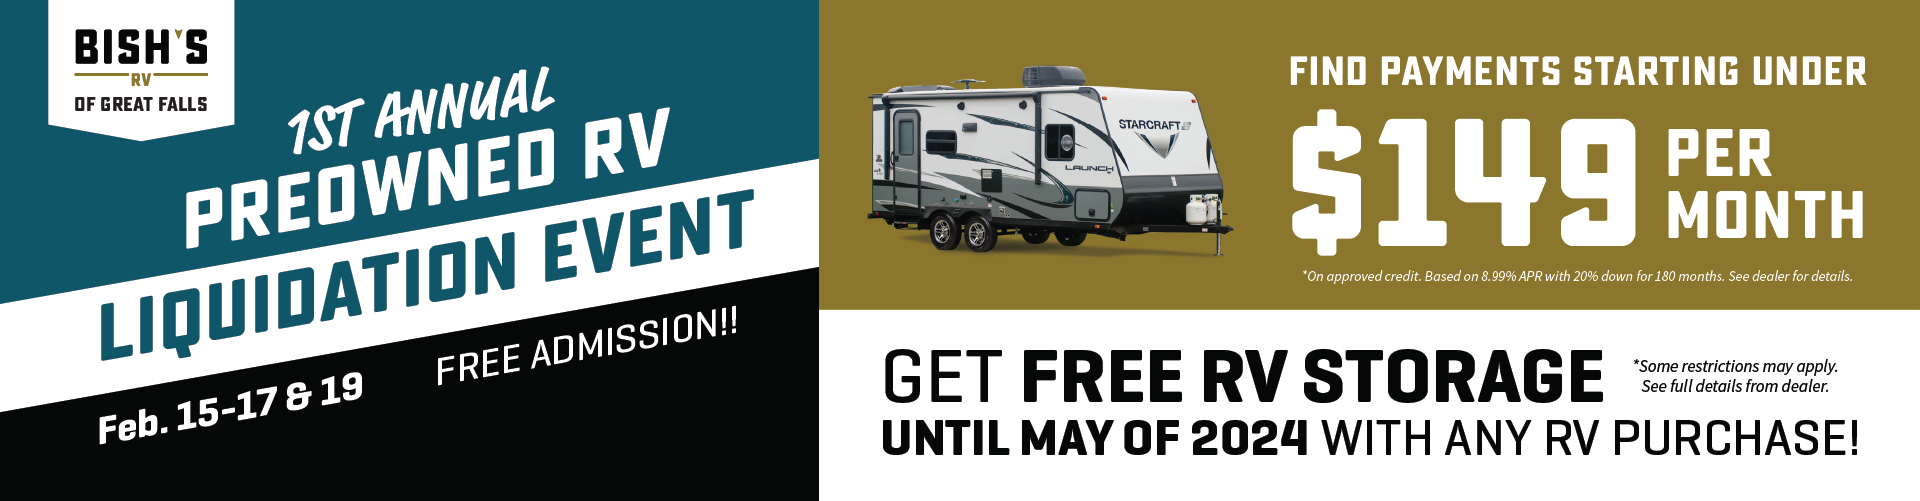 1st Annual Preowned RV Liquidation Event - Feb. 15-17 & 19, 2024 - Bish's RV of Great Falls - Find payments starting under $149 Per Month OAC